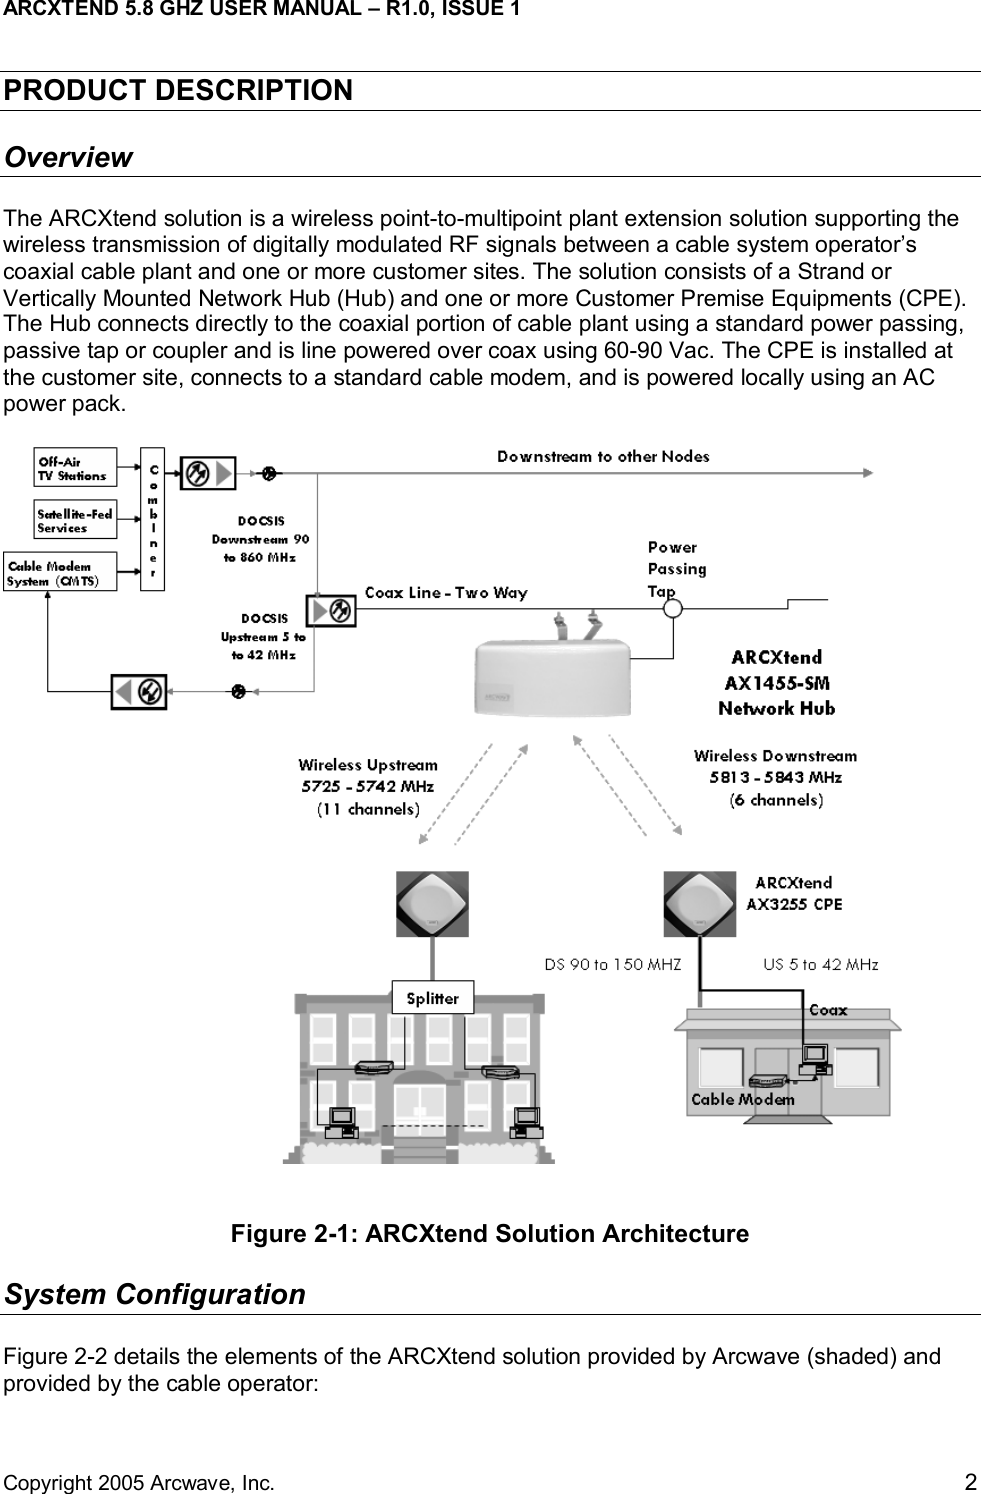 ARCXTEND 5.8 GHZ USER MANUAL – R1.0, ISSUE 1  Copyright 2005 Arcwave, Inc.    2 PRODUCT DESCRIPTION Overview   The ARCXtend solution is a wireless point-to-multipoint plant extension solution supporting the wireless transmission of digitally modulated RF signals between a cable system operator’s coaxial cable plant and one or more customer sites. The solution consists of a Strand or Vertically Mounted Network Hub (Hub) and one or more Customer Premise Equipments (CPE). The Hub connects directly to the coaxial portion of cable plant using a standard power passing, passive tap or coupler and is line powered over coax using 60-90 Vac. The CPE is installed at the customer site, connects to a standard cable modem, and is powered locally using an AC power pack.   Figure 2-1: ARCXtend Solution Architecture System Configuration Figure 2-2 details the elements of the ARCXtend solution provided by Arcwave (shaded) and provided by the cable operator:  